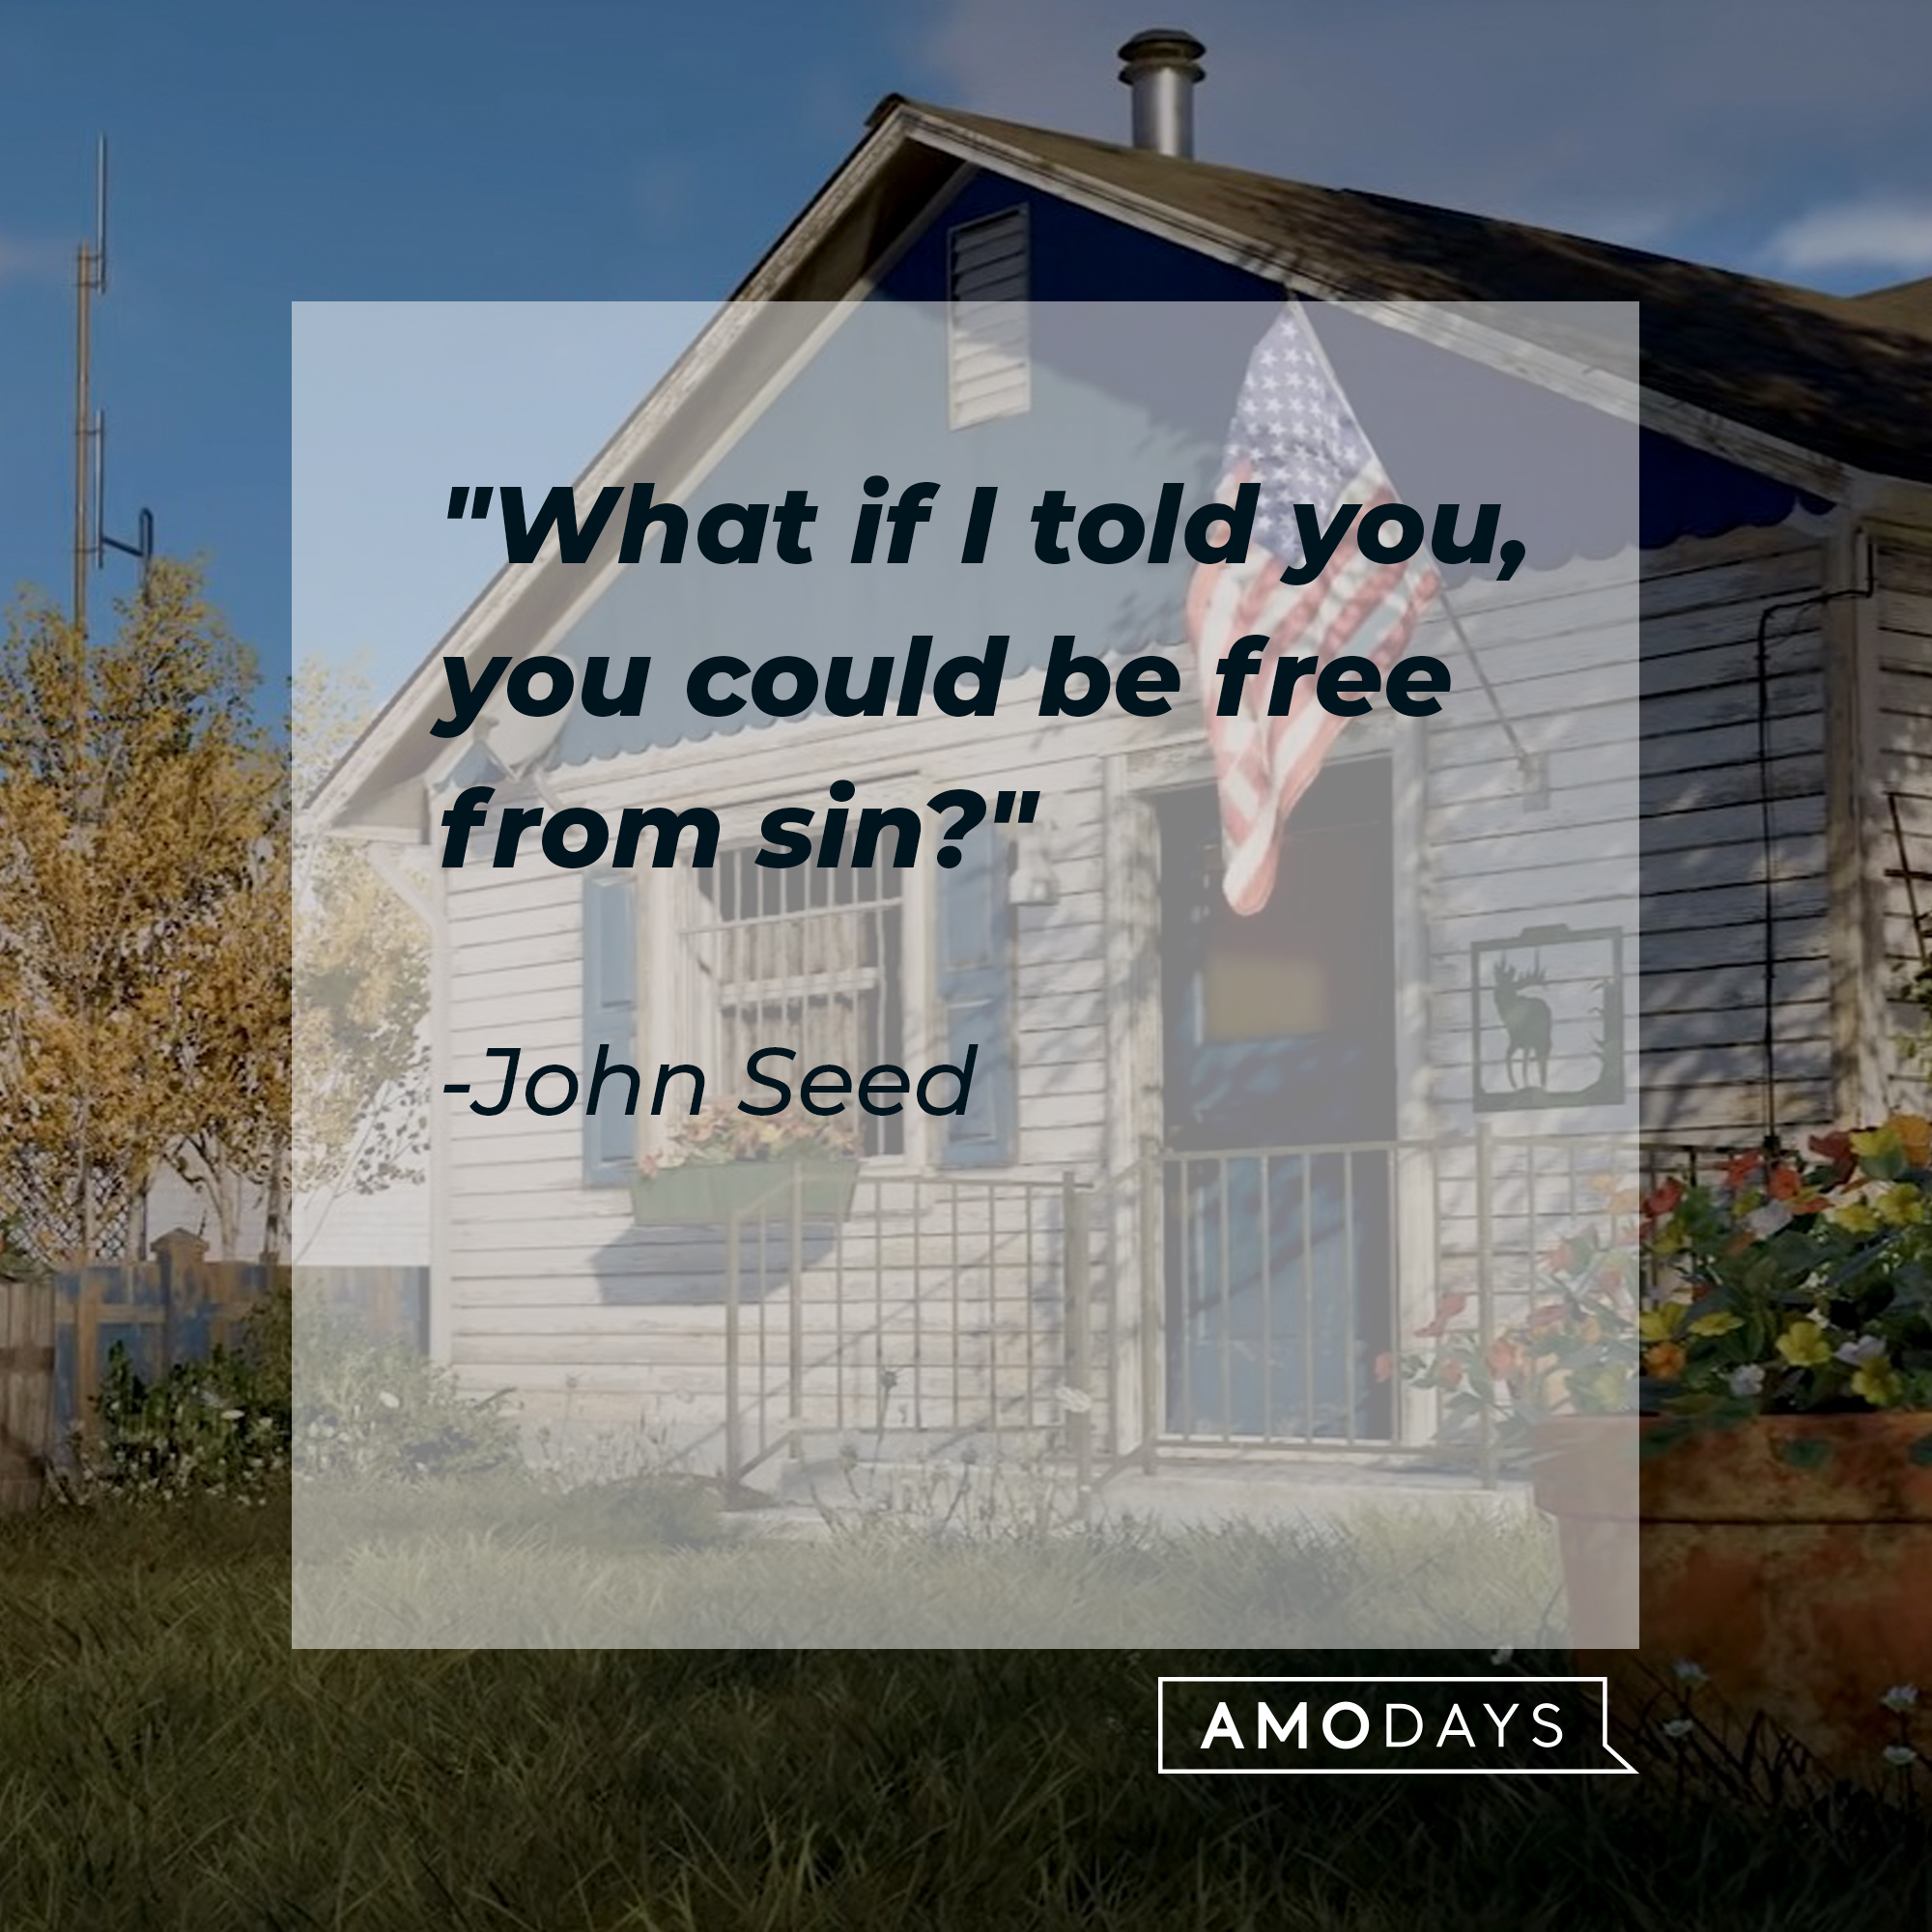 An image of "Far Cry 5" with John Seed's quote: "What if I told you, you could be free from sin?" | Source: youtube.com/Ubisoft North America